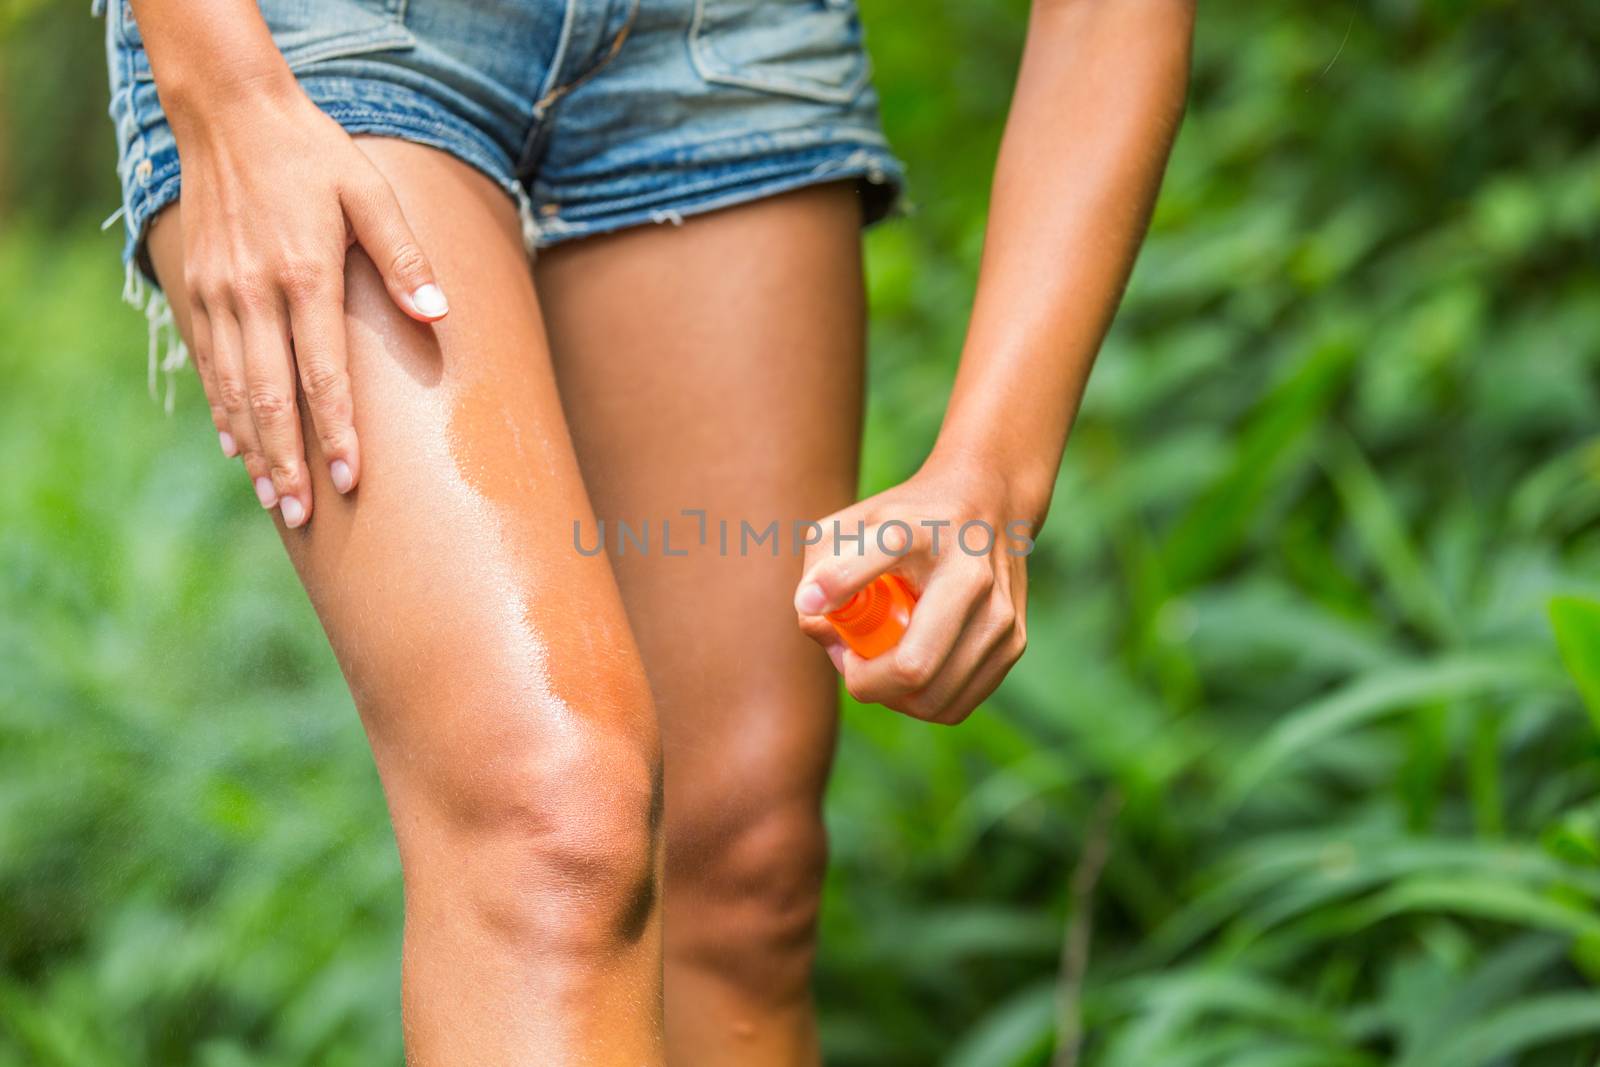 Mosquito repellent spray. Woman spraying insect repellent against zika virus bug bites virus on legs skin outdoor in nature forest using spray bottle by Maridav